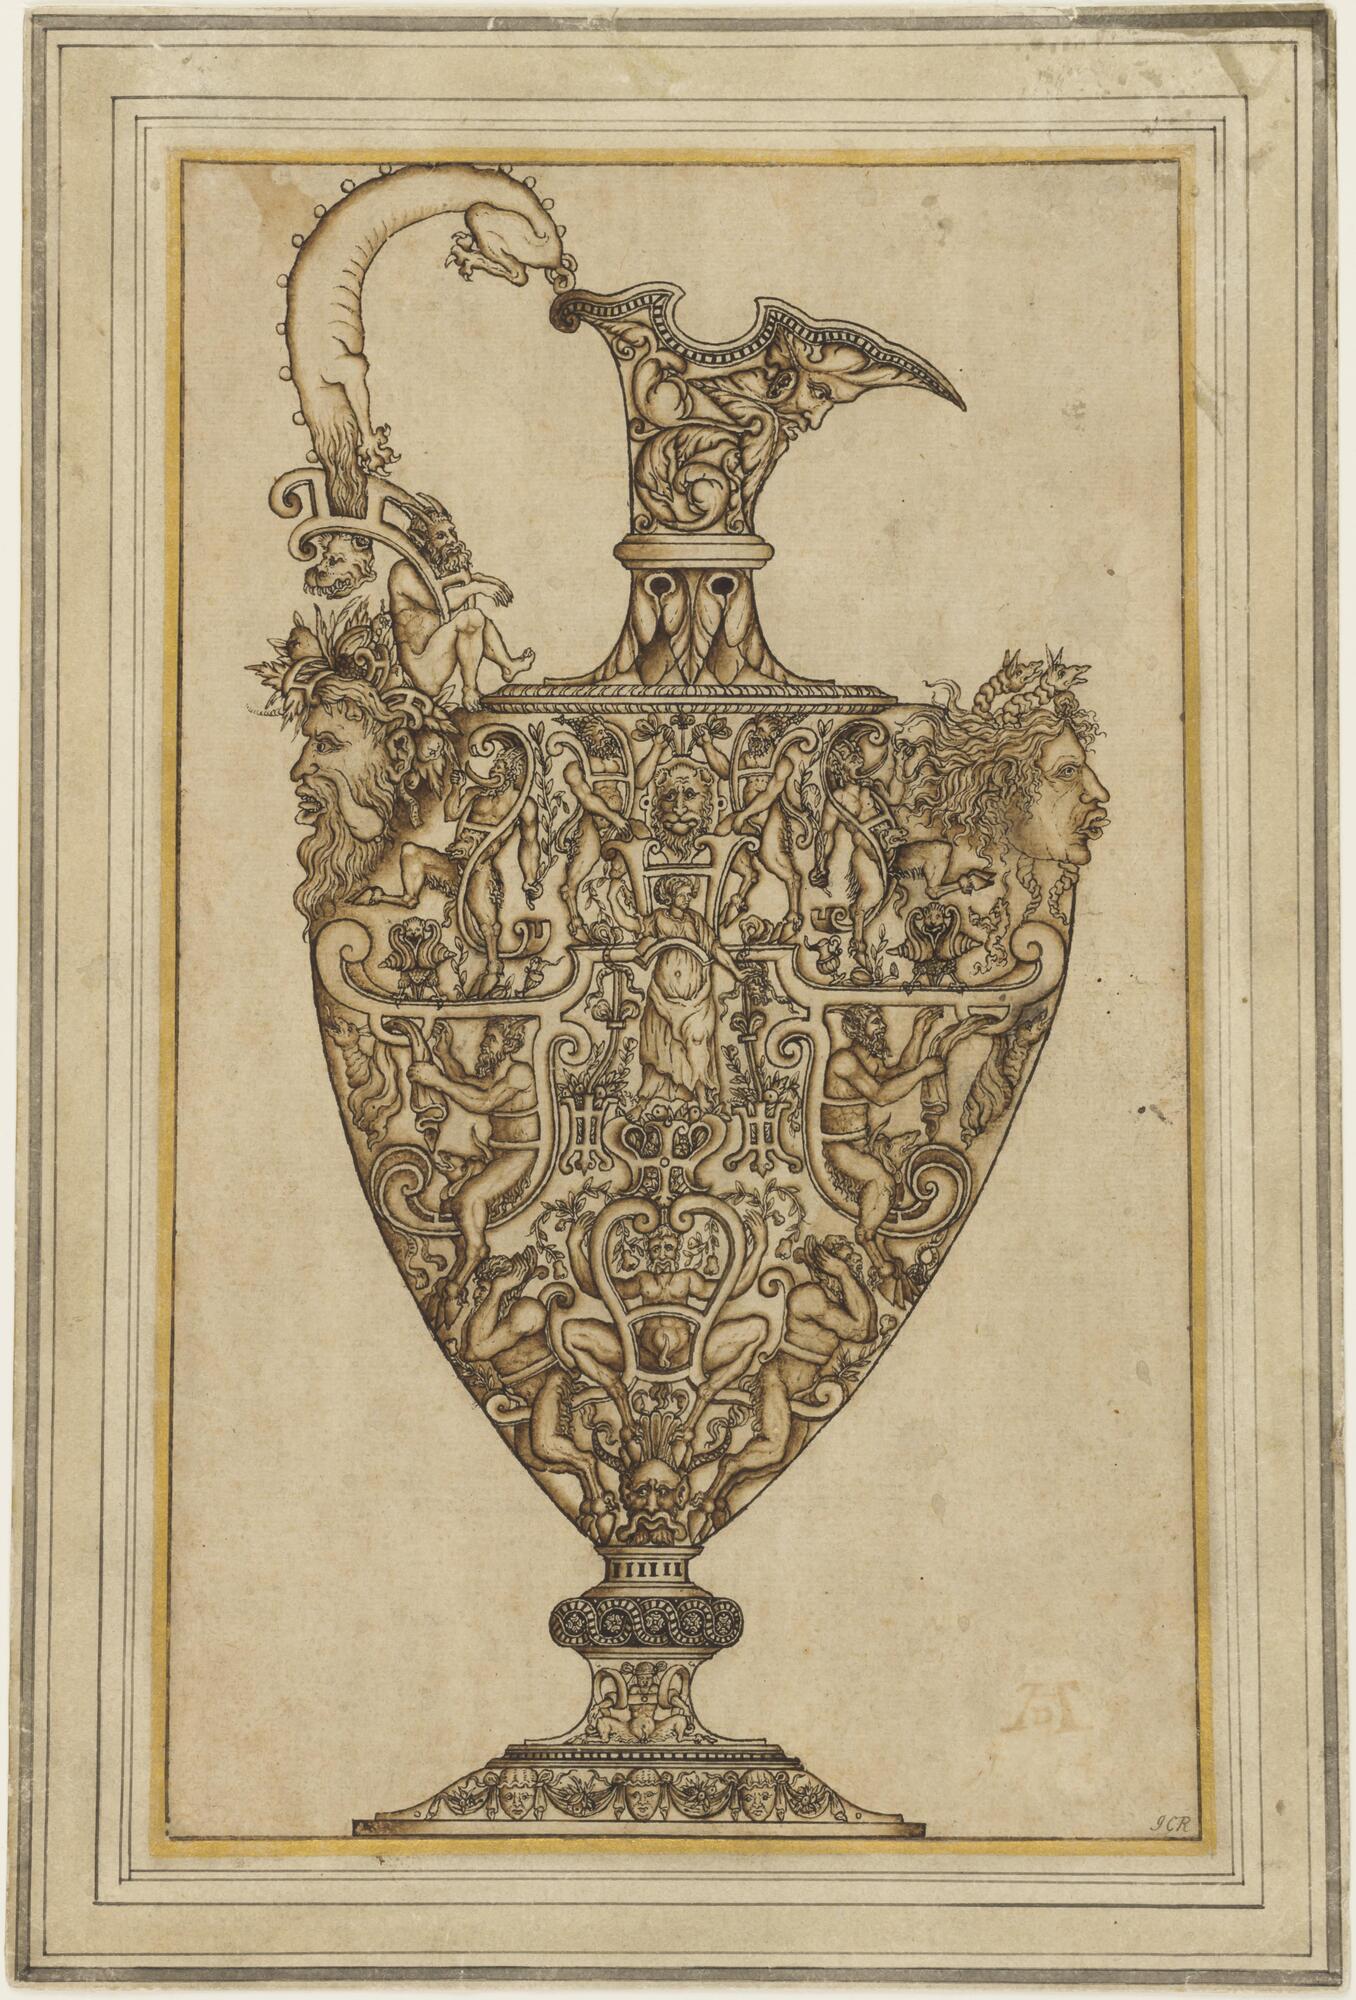 The ewer in this drawing is decorated with cavorting satyrs, lions, and grotesque masks.